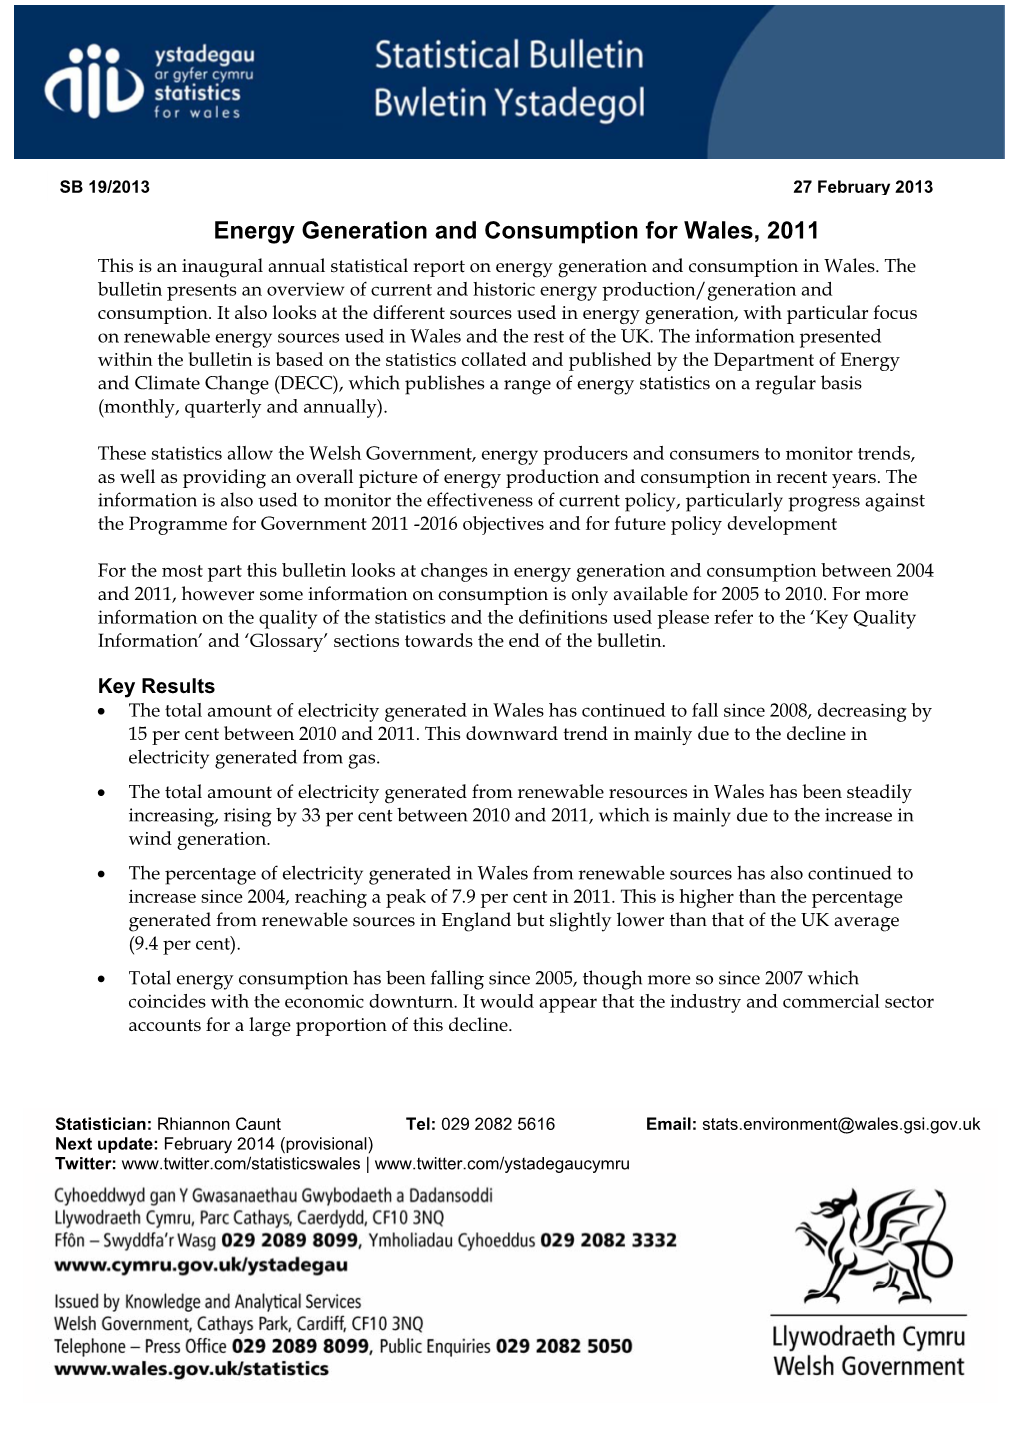 SB 19/2013 Energy Generation and Consumption for Wales, 2011